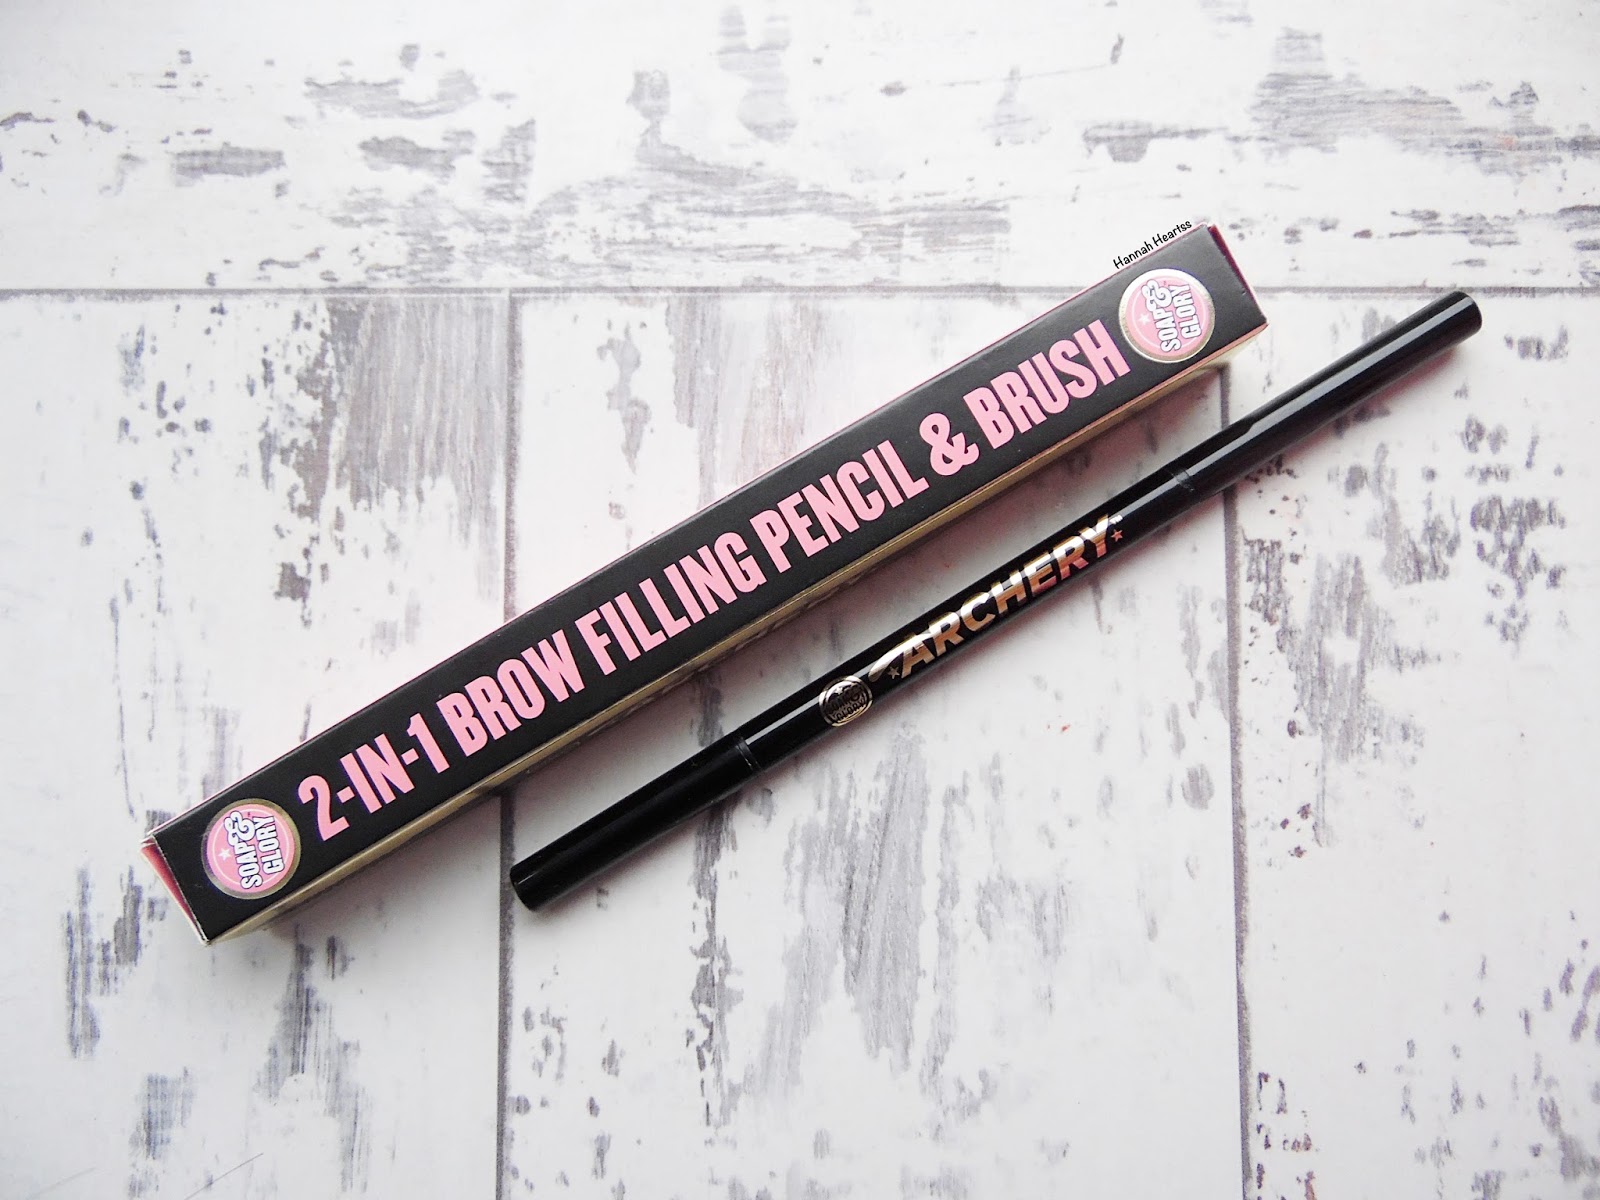 Soap and Glory Archery Pencil 